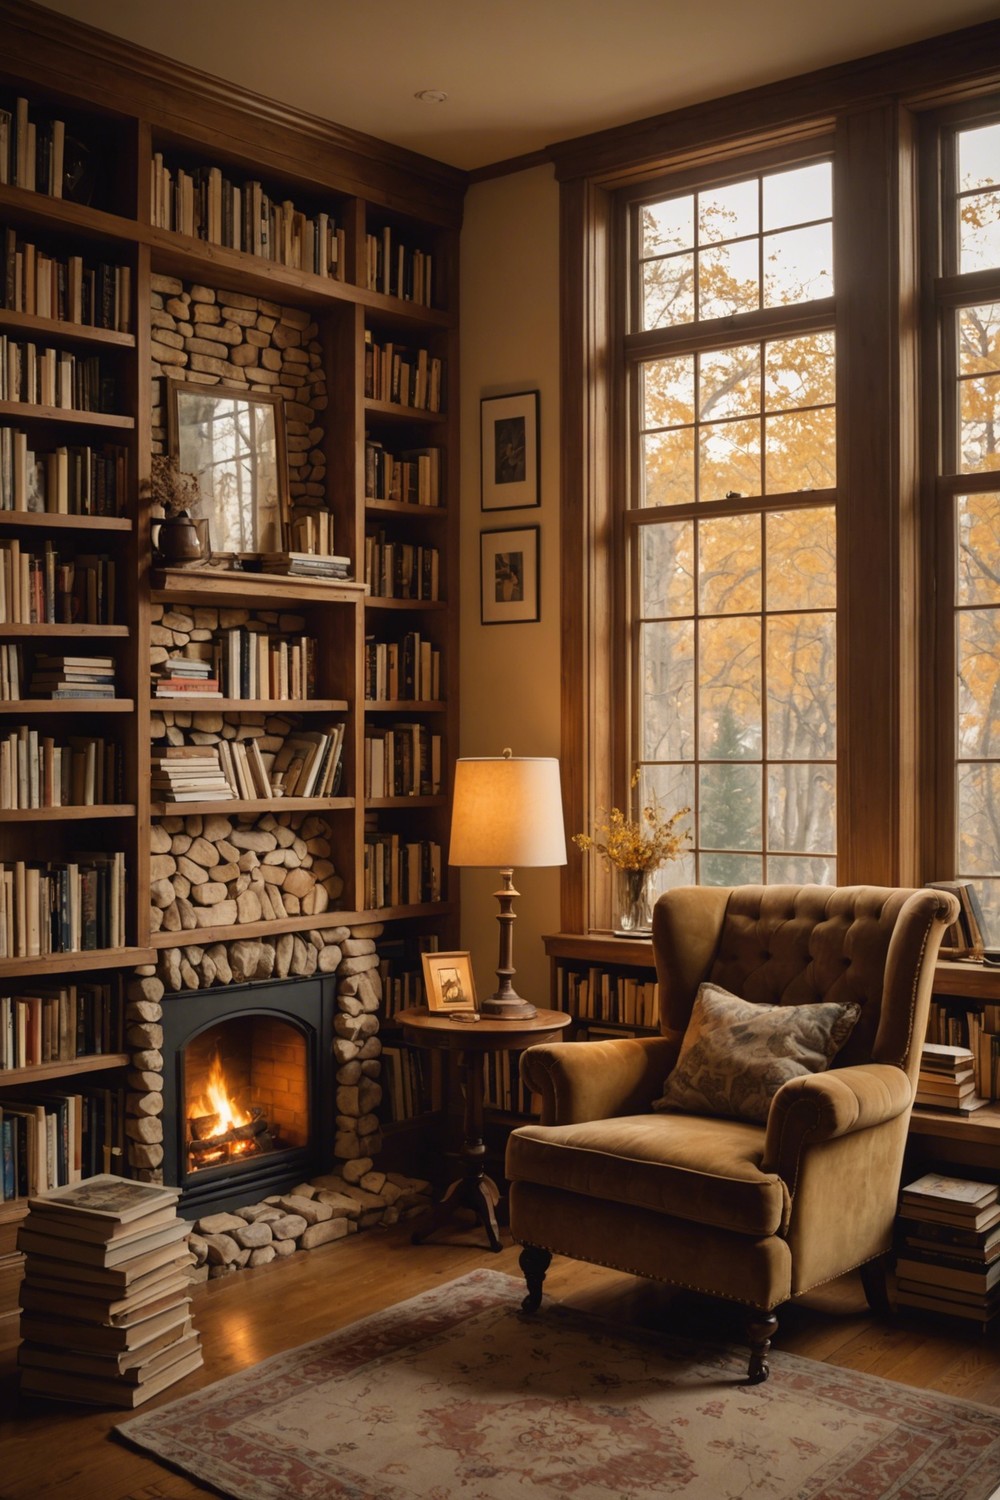 Cozy Reading Nook with Built-in Shelves: